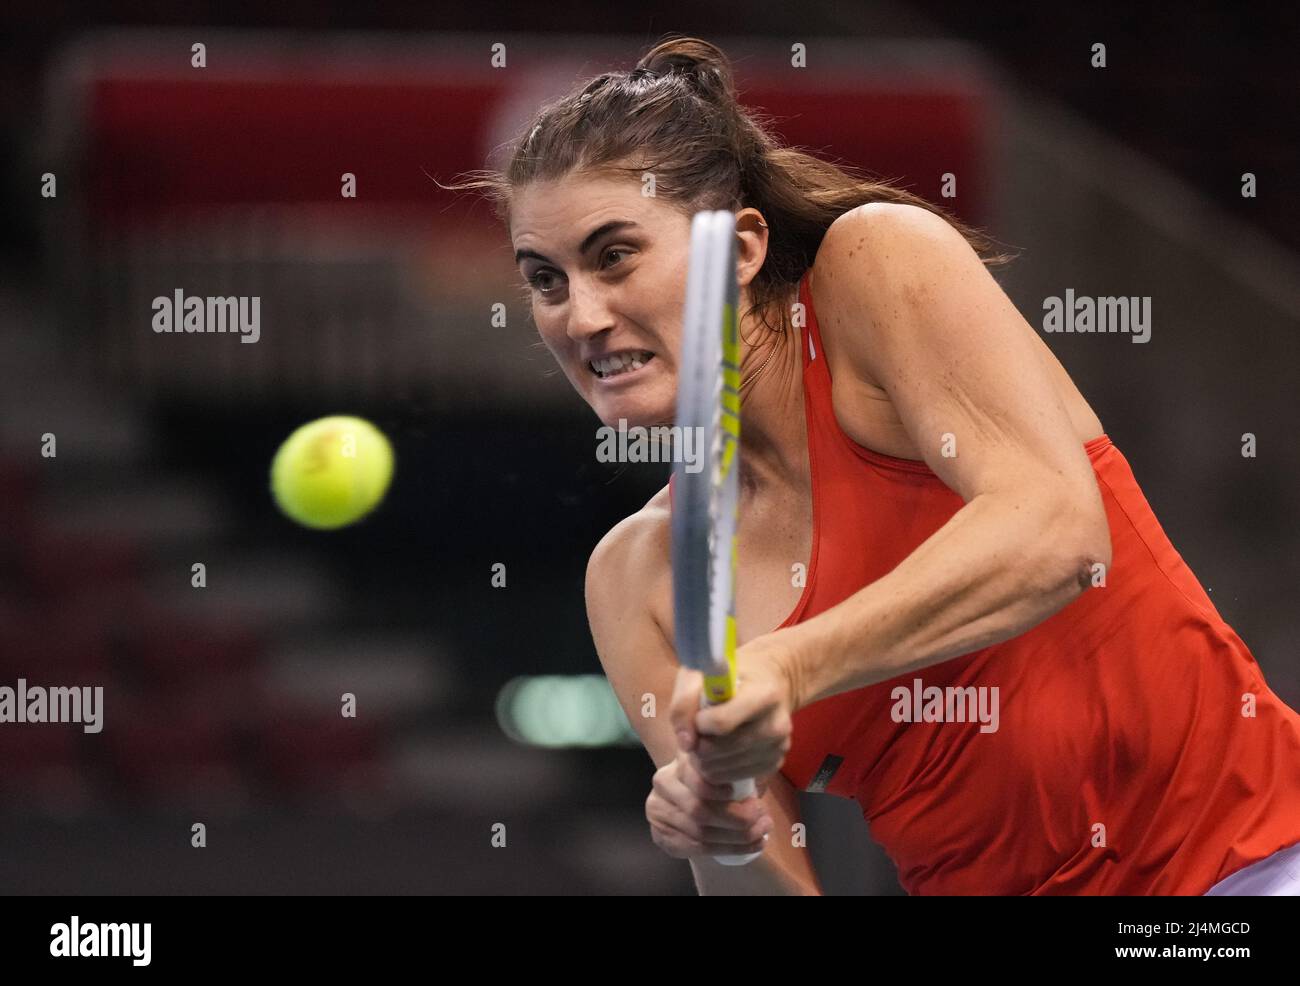 April 15, 2022, VANCOUVER, BC, CANADA: Canada's Rebecca Marino returns to  Latvia's Daniela Vismane during a Billie Jean King Cup qualifier singles  tennis match, in Vancouver, on Friday, April 15, 2022. (Credit